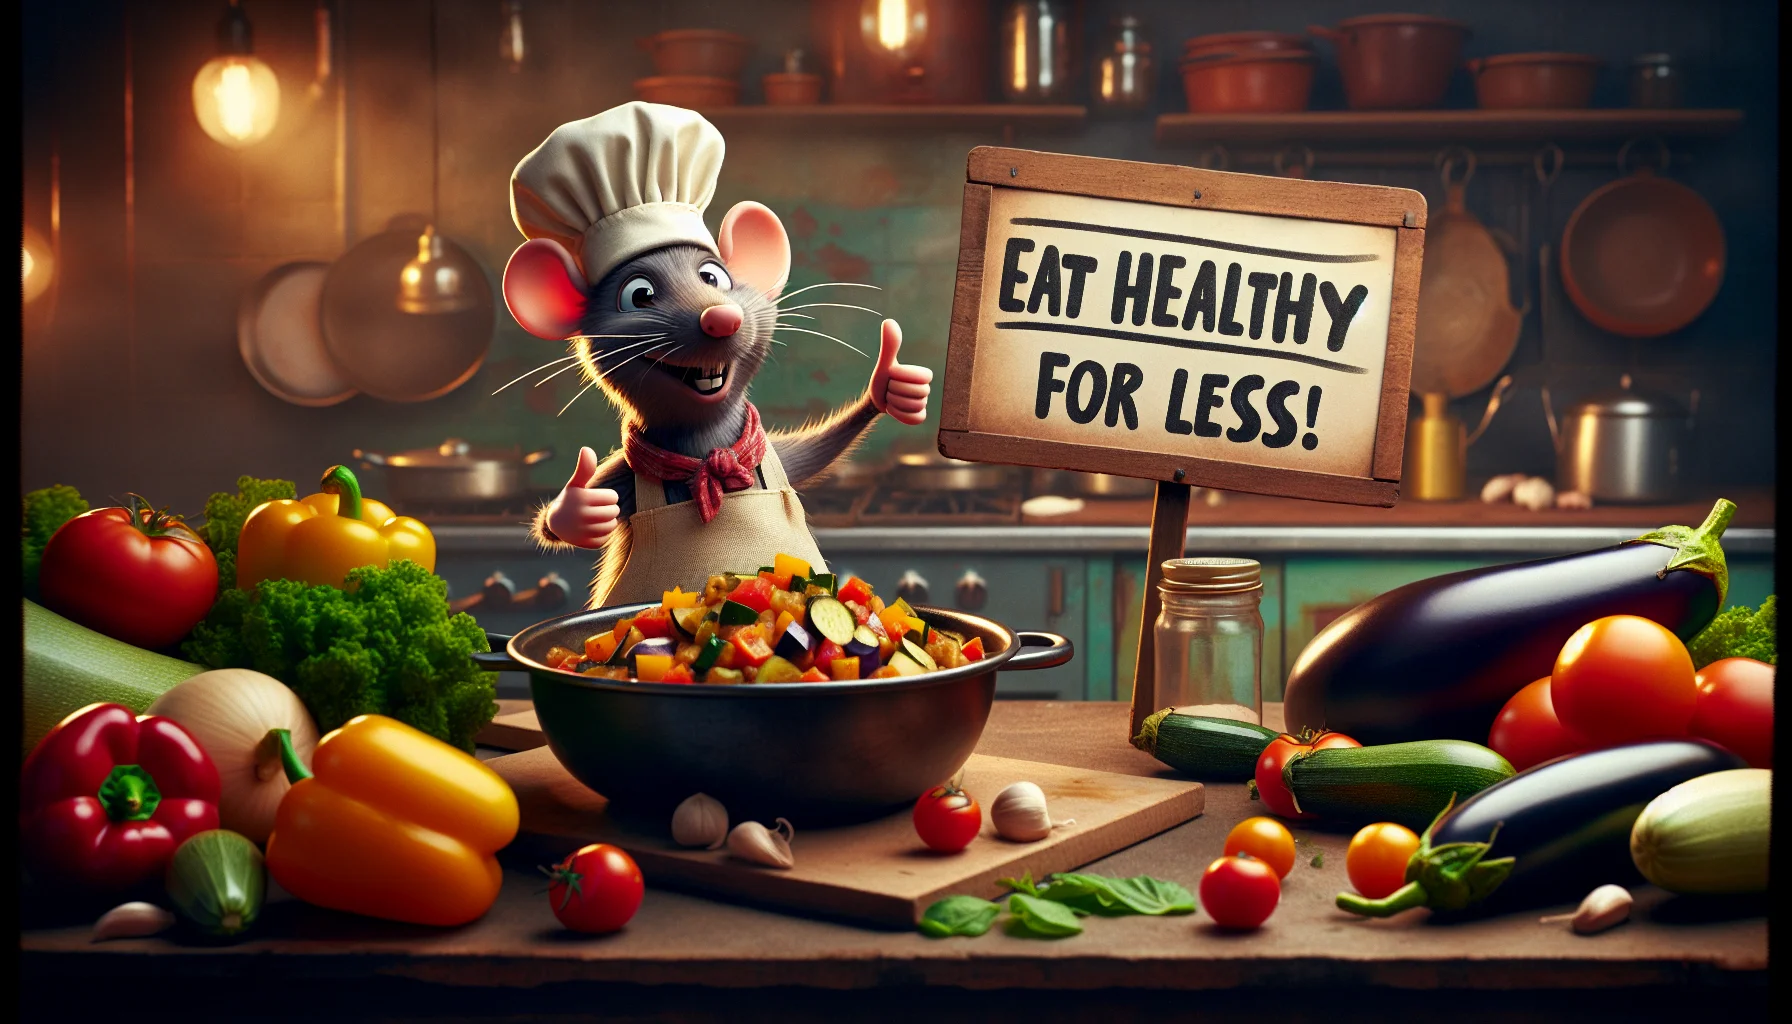 Generate an image of a cheeky, cartoon rat in a chef's hat and apron standing next to a large bowl of colorful ratatouille. The rat is holding a sign reading 'Eat Healthy For Less!' in one tiny paw, making a thumbs-up gesture with the other. The backdrop is a rustic kitchen scene, with budget-friendly ingredients scattered haphazardly around - bell peppers, tomatoes, eggplants, zucchini. The mood is fun and playful, with warm lighting enveloping the scene, creating a cozy and inviting atmosphere.